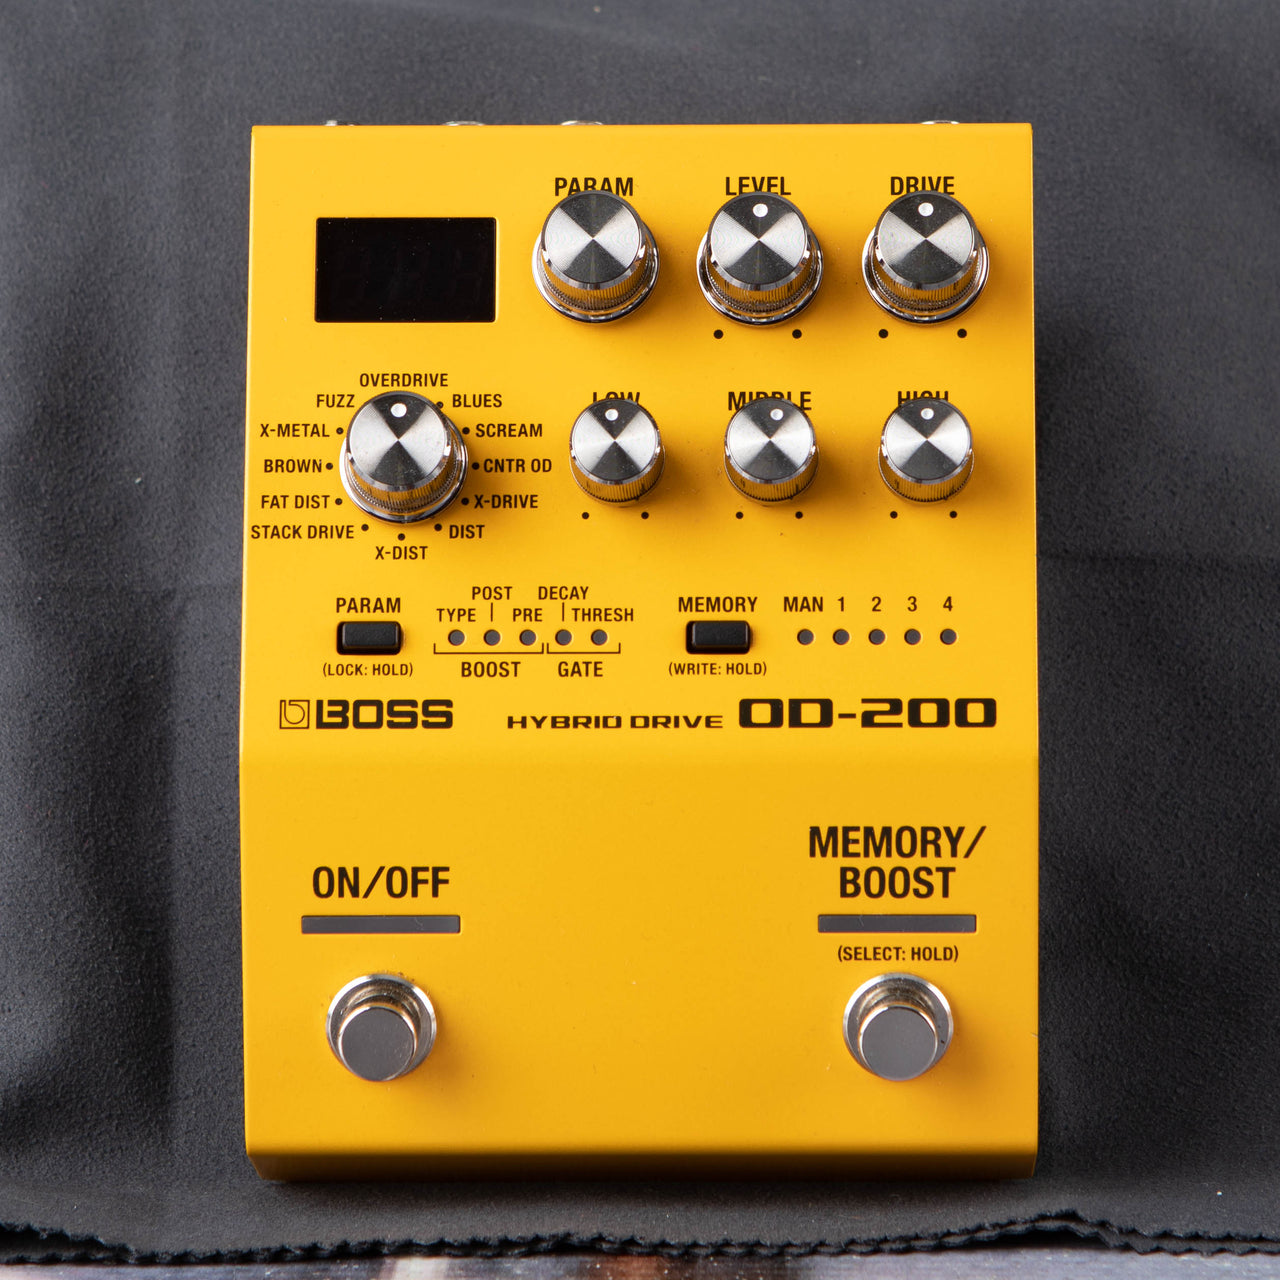 Used BOSS OD-200 Hybrid Drive | For Sale | Replay Guitar Exchange